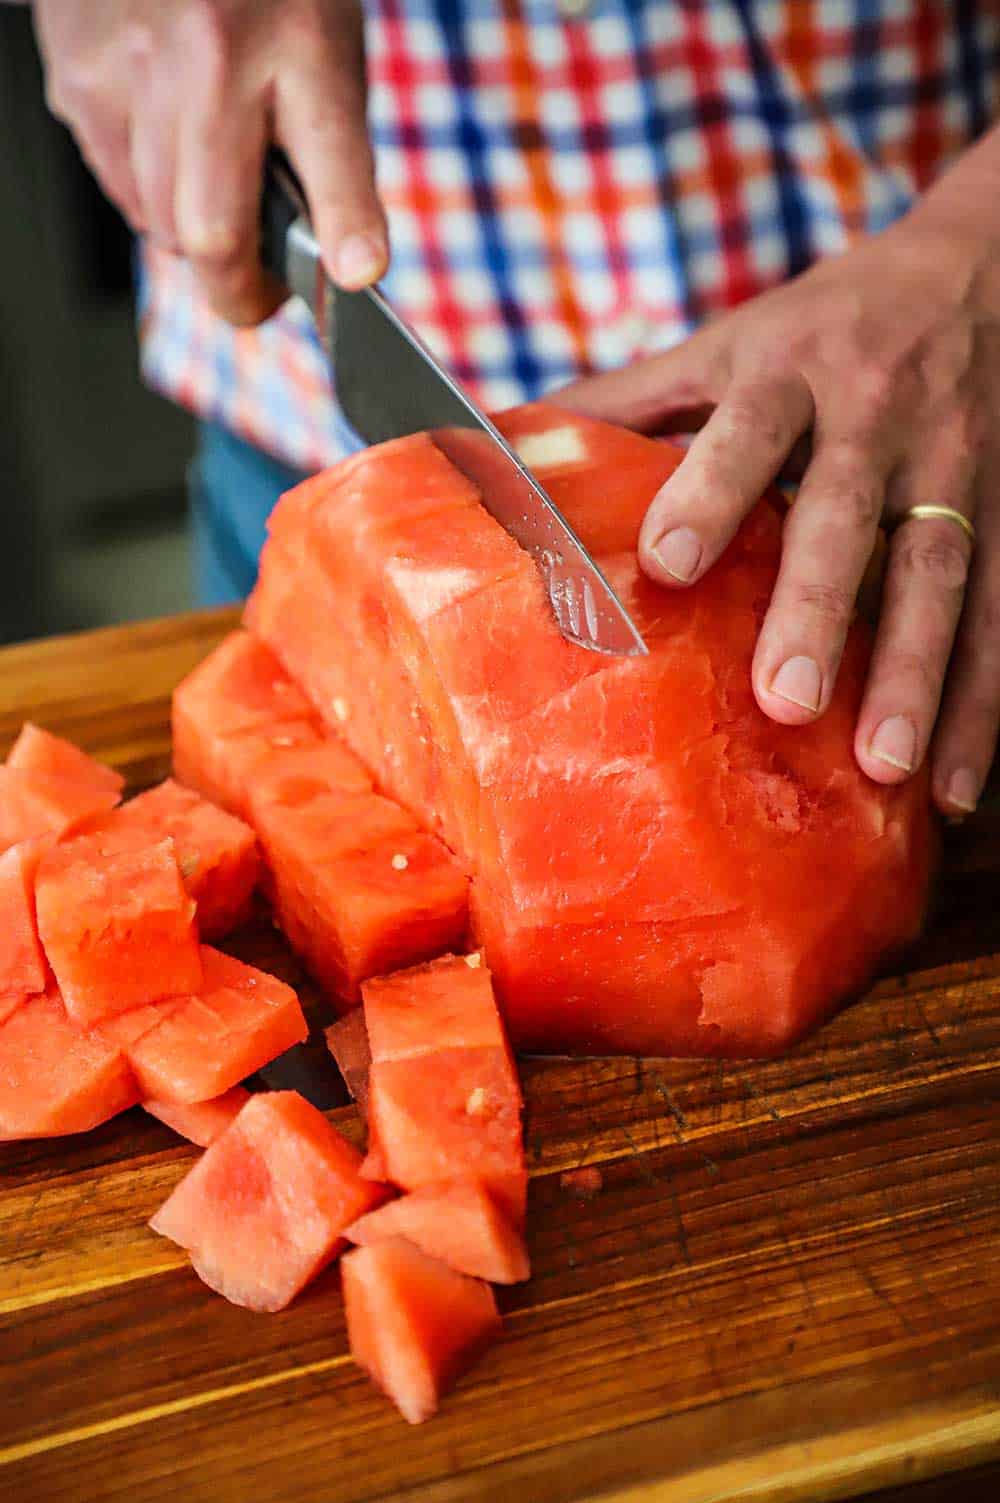 A person using a chef's knife to cut a seedless watermelon into cubes.